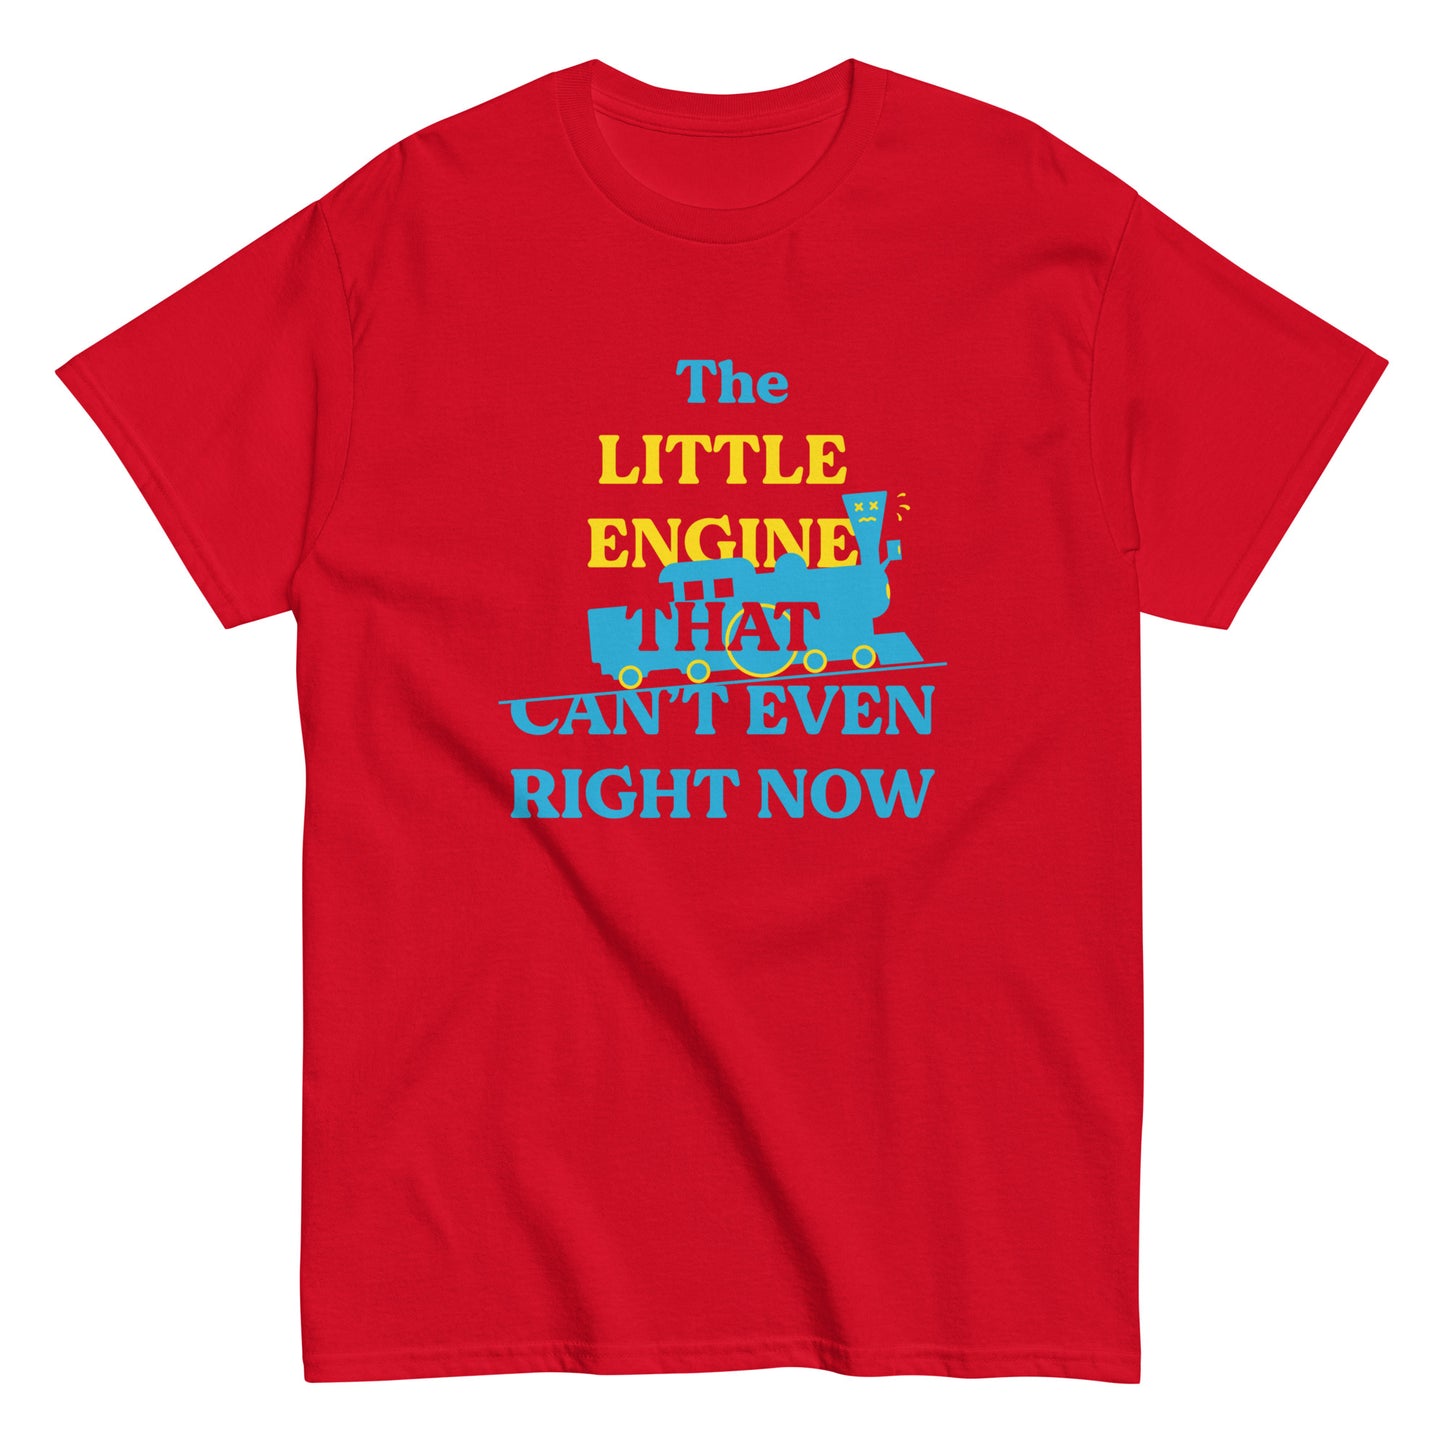 The Little Engine That Can't Even Right Now Men's Classic Tee